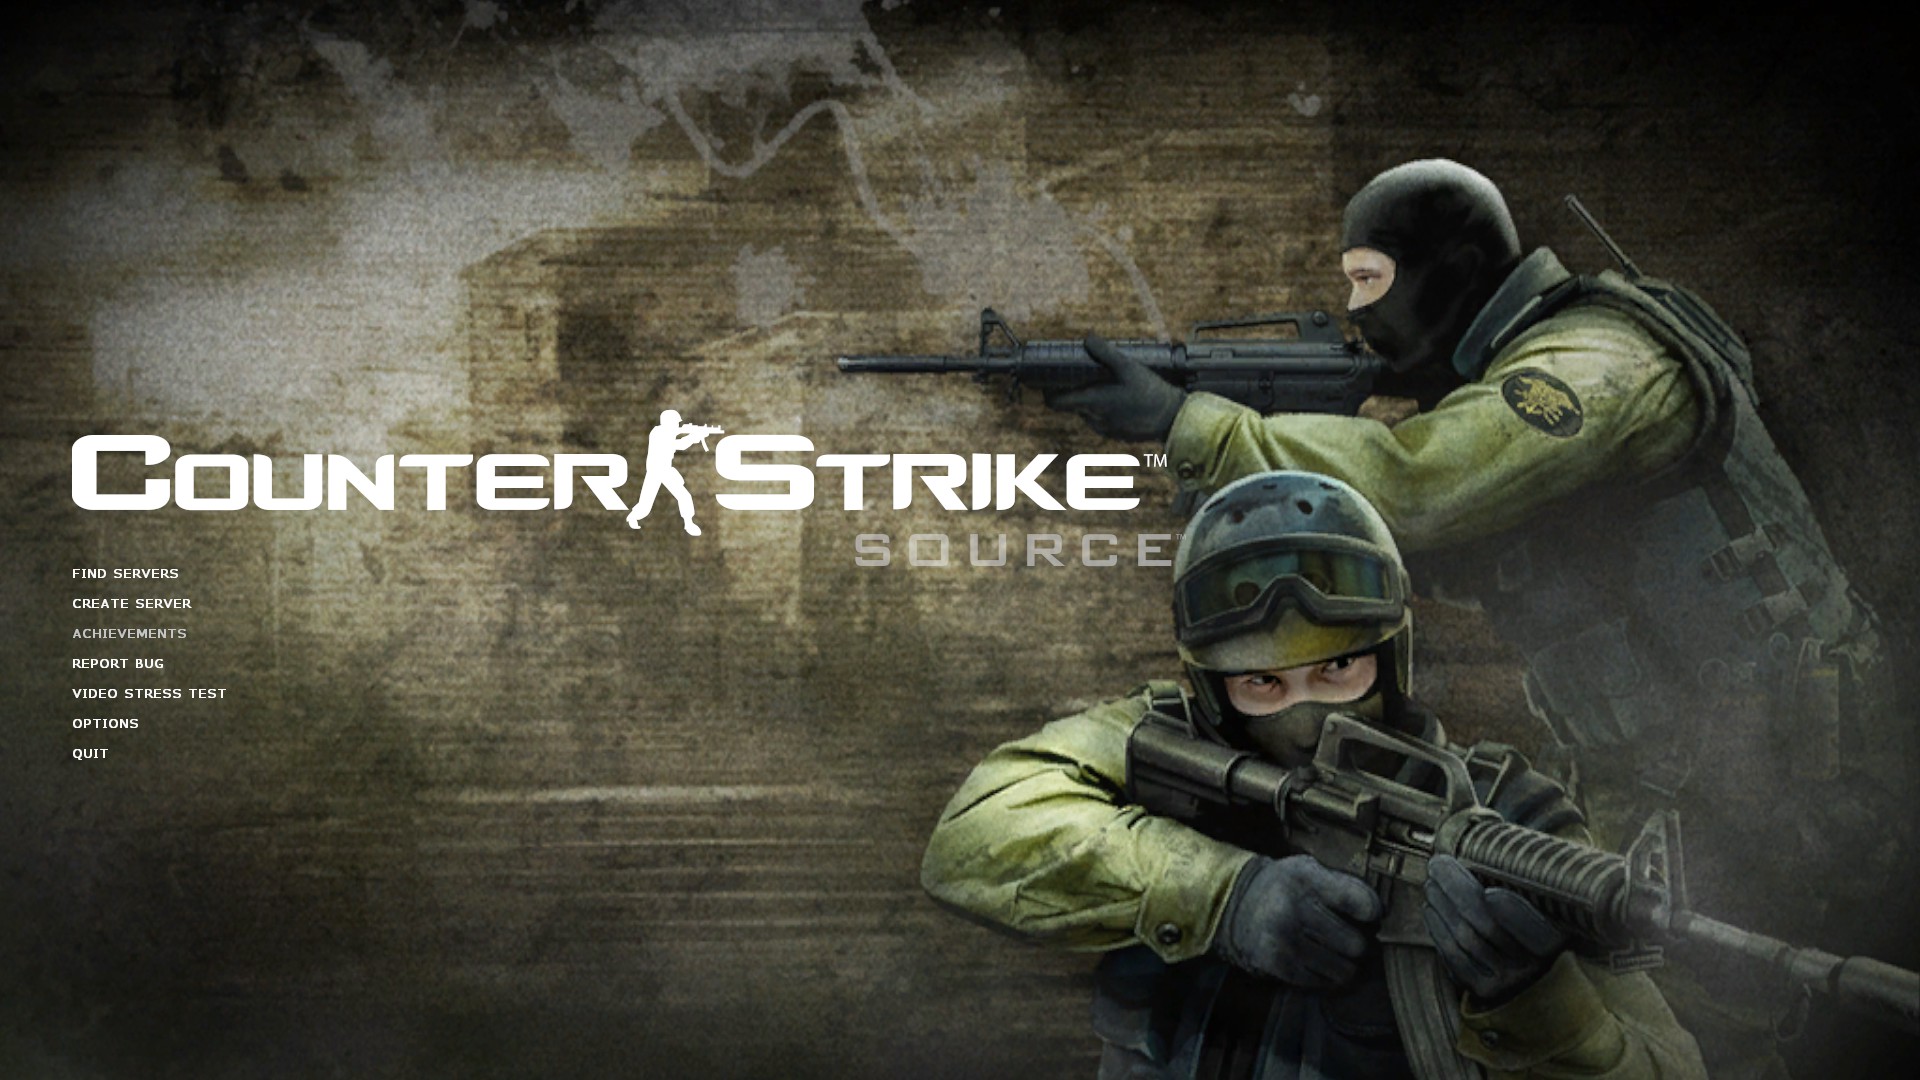 Counter-Strike: Source (Game) - Giant Bomb